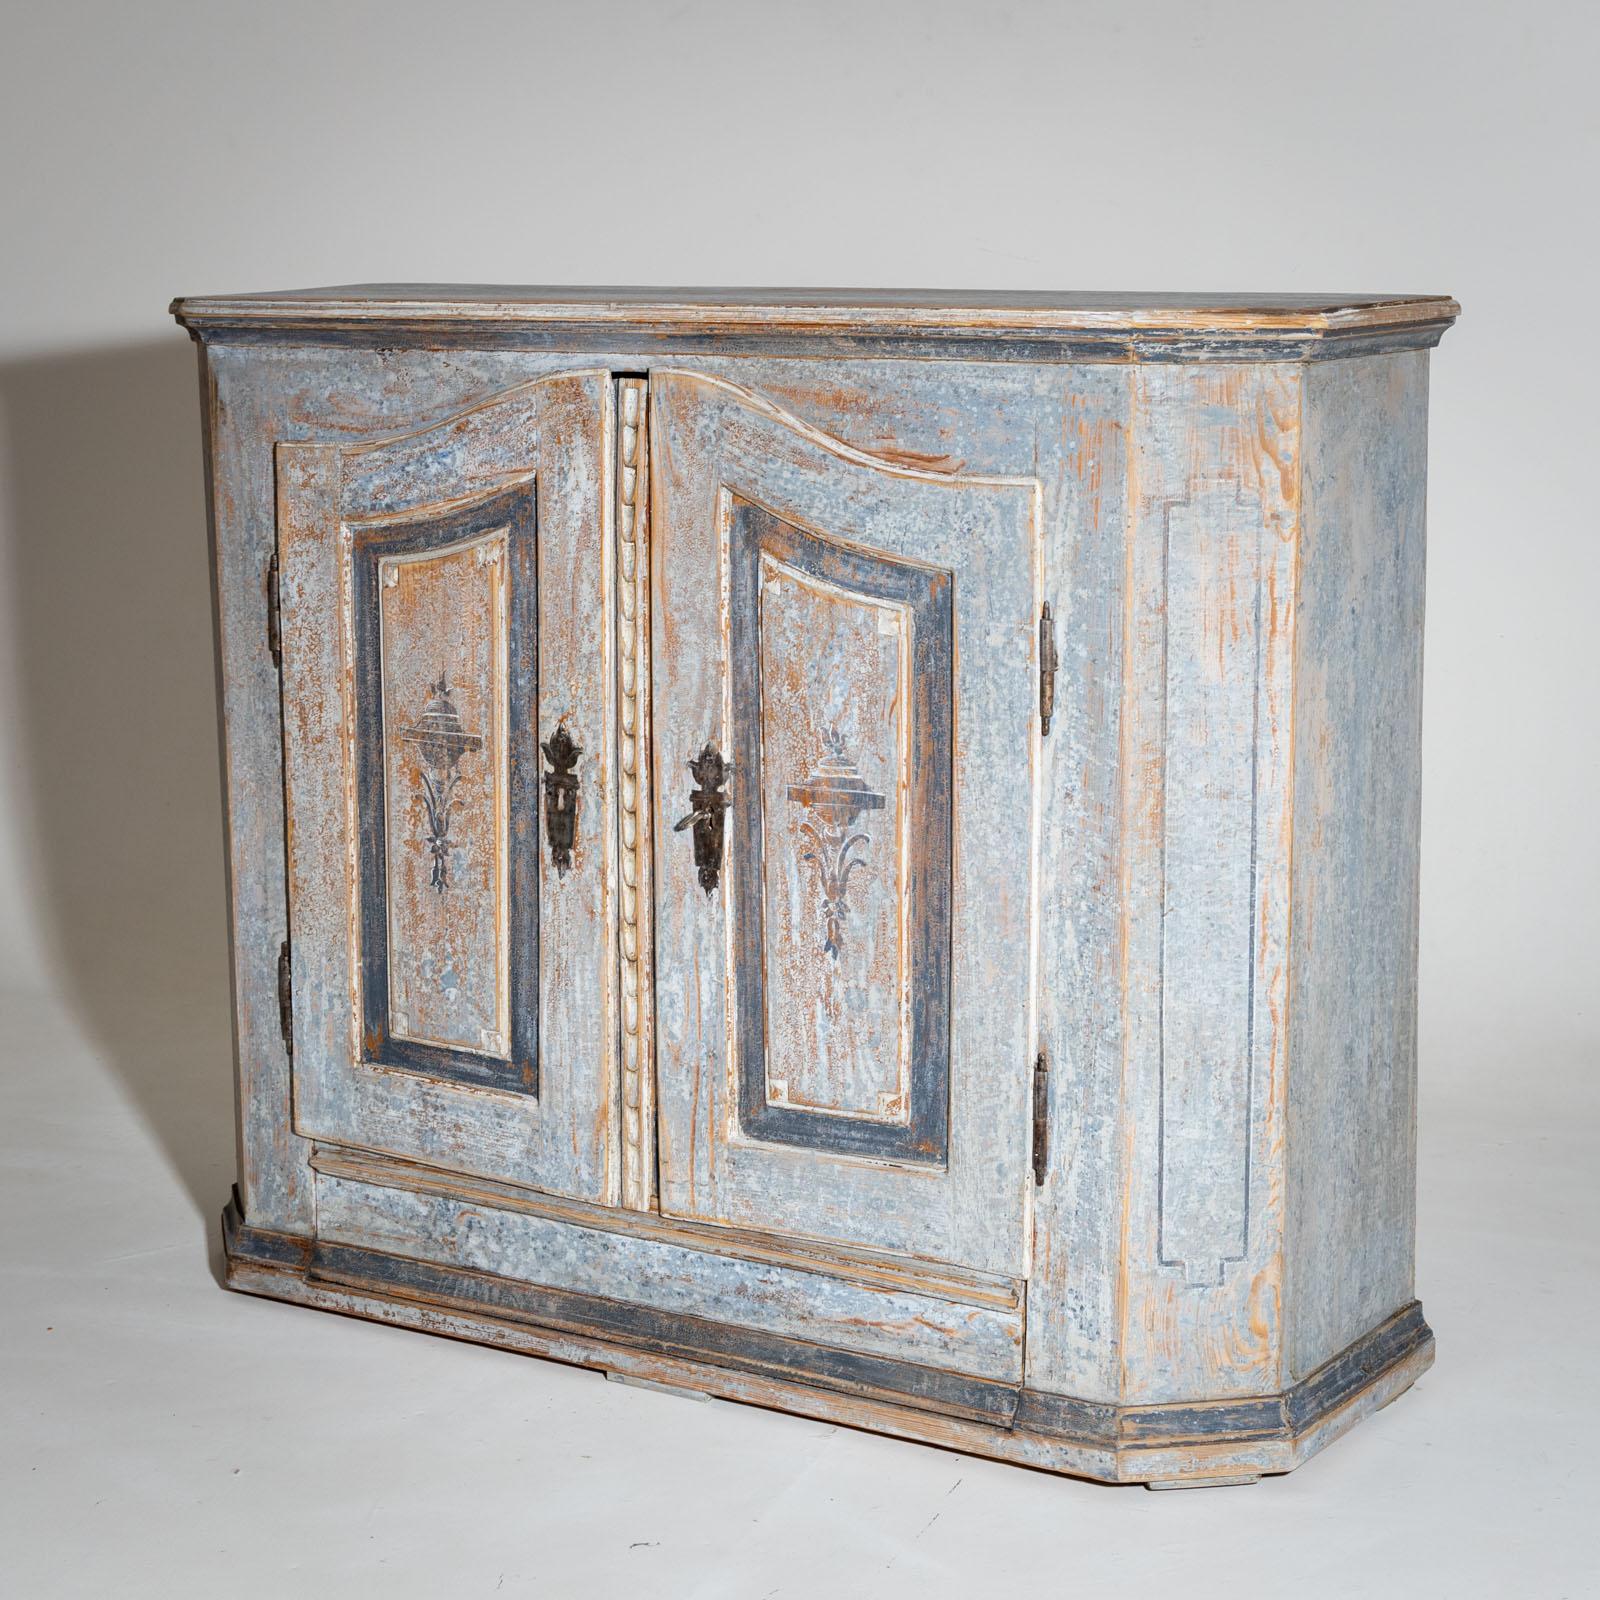 Hand-painted two-door sideboard with beveled corners and curved doors. The panels on the front are decorated with amphorae and set off in dark blue. The body is newly painted and was designed according to historical models and given an antique